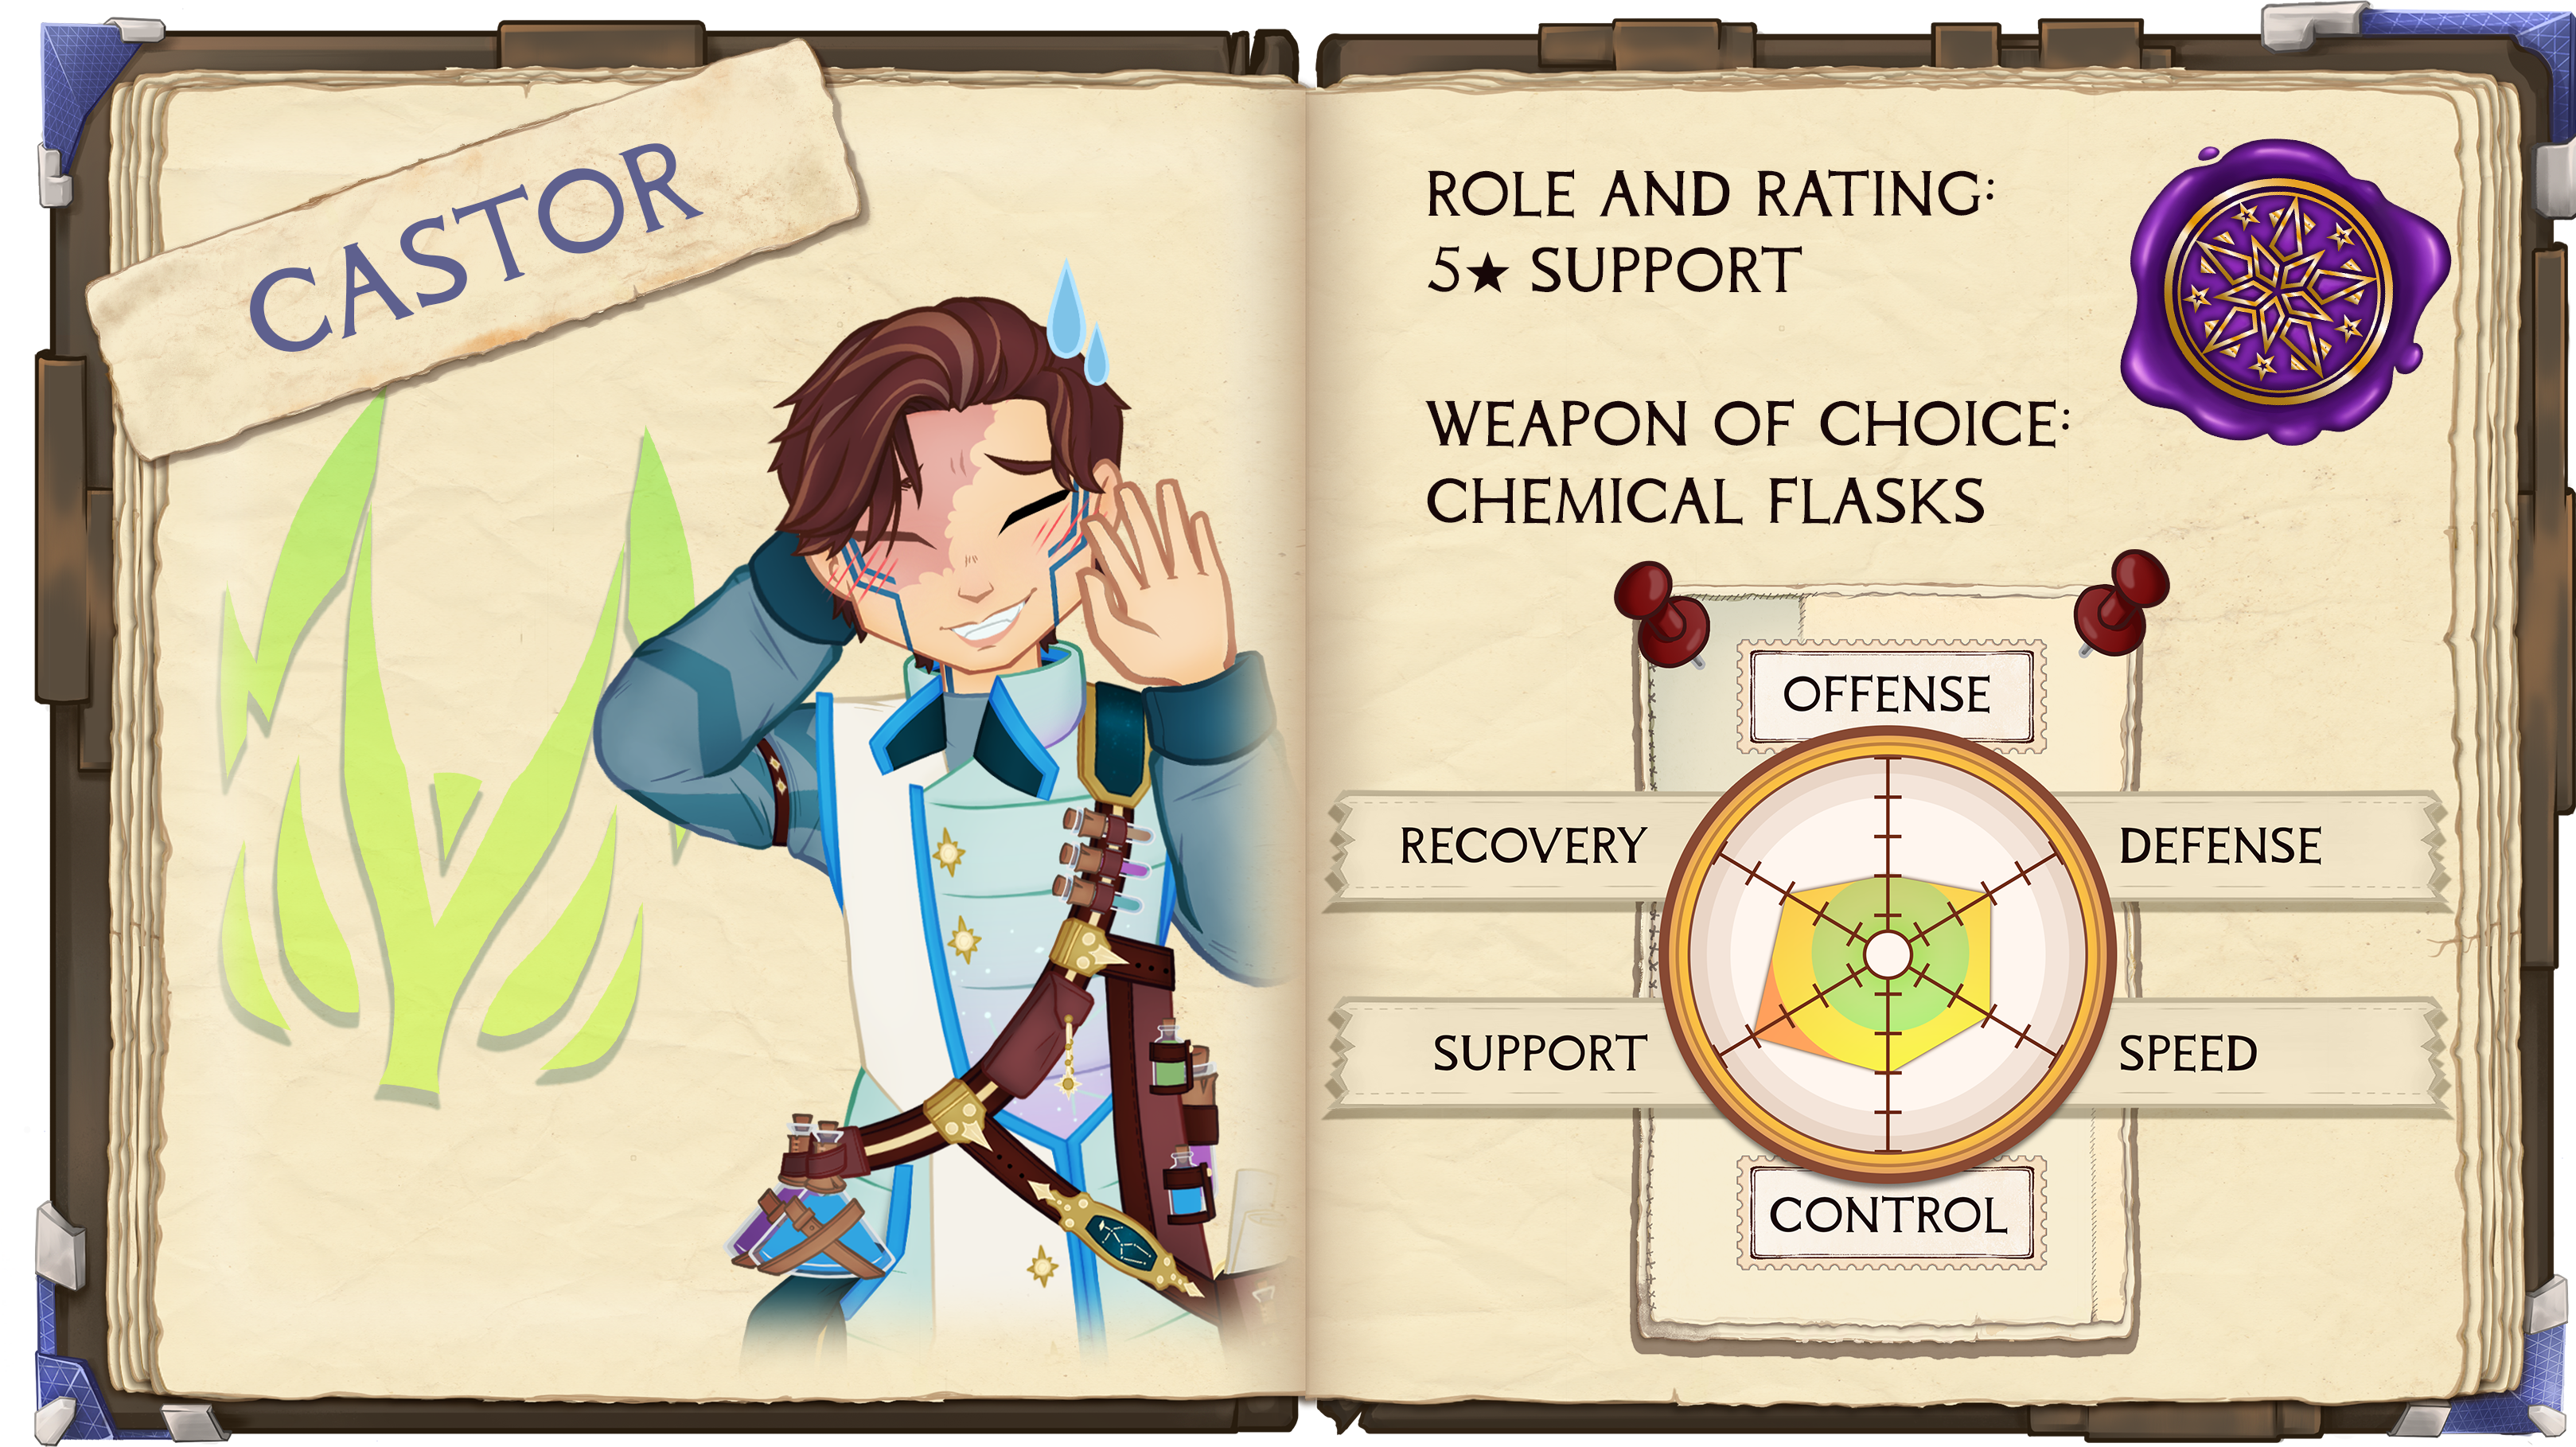 Castor. Role and Rating: 5 Star Support. Weapon of Choice: Chemical Flasks: Offense: 2/5. Defense: 3/5. Speed: 3/5. Control: 3/5. Support: 4/5. Recovery: 3/5.